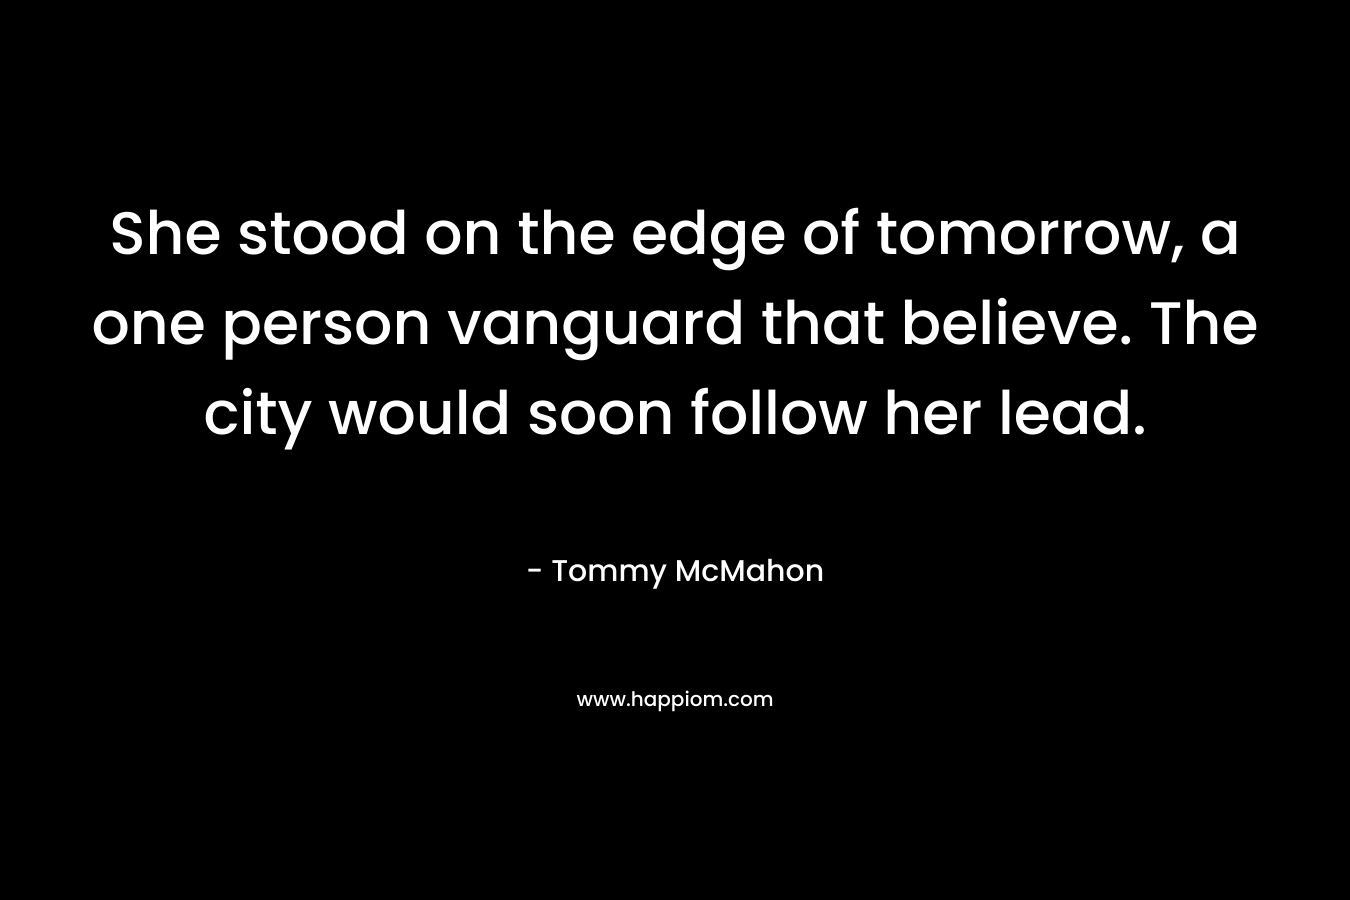 She stood on the edge of tomorrow, a one person vanguard that believe. The city would soon follow her lead. – Tommy McMahon